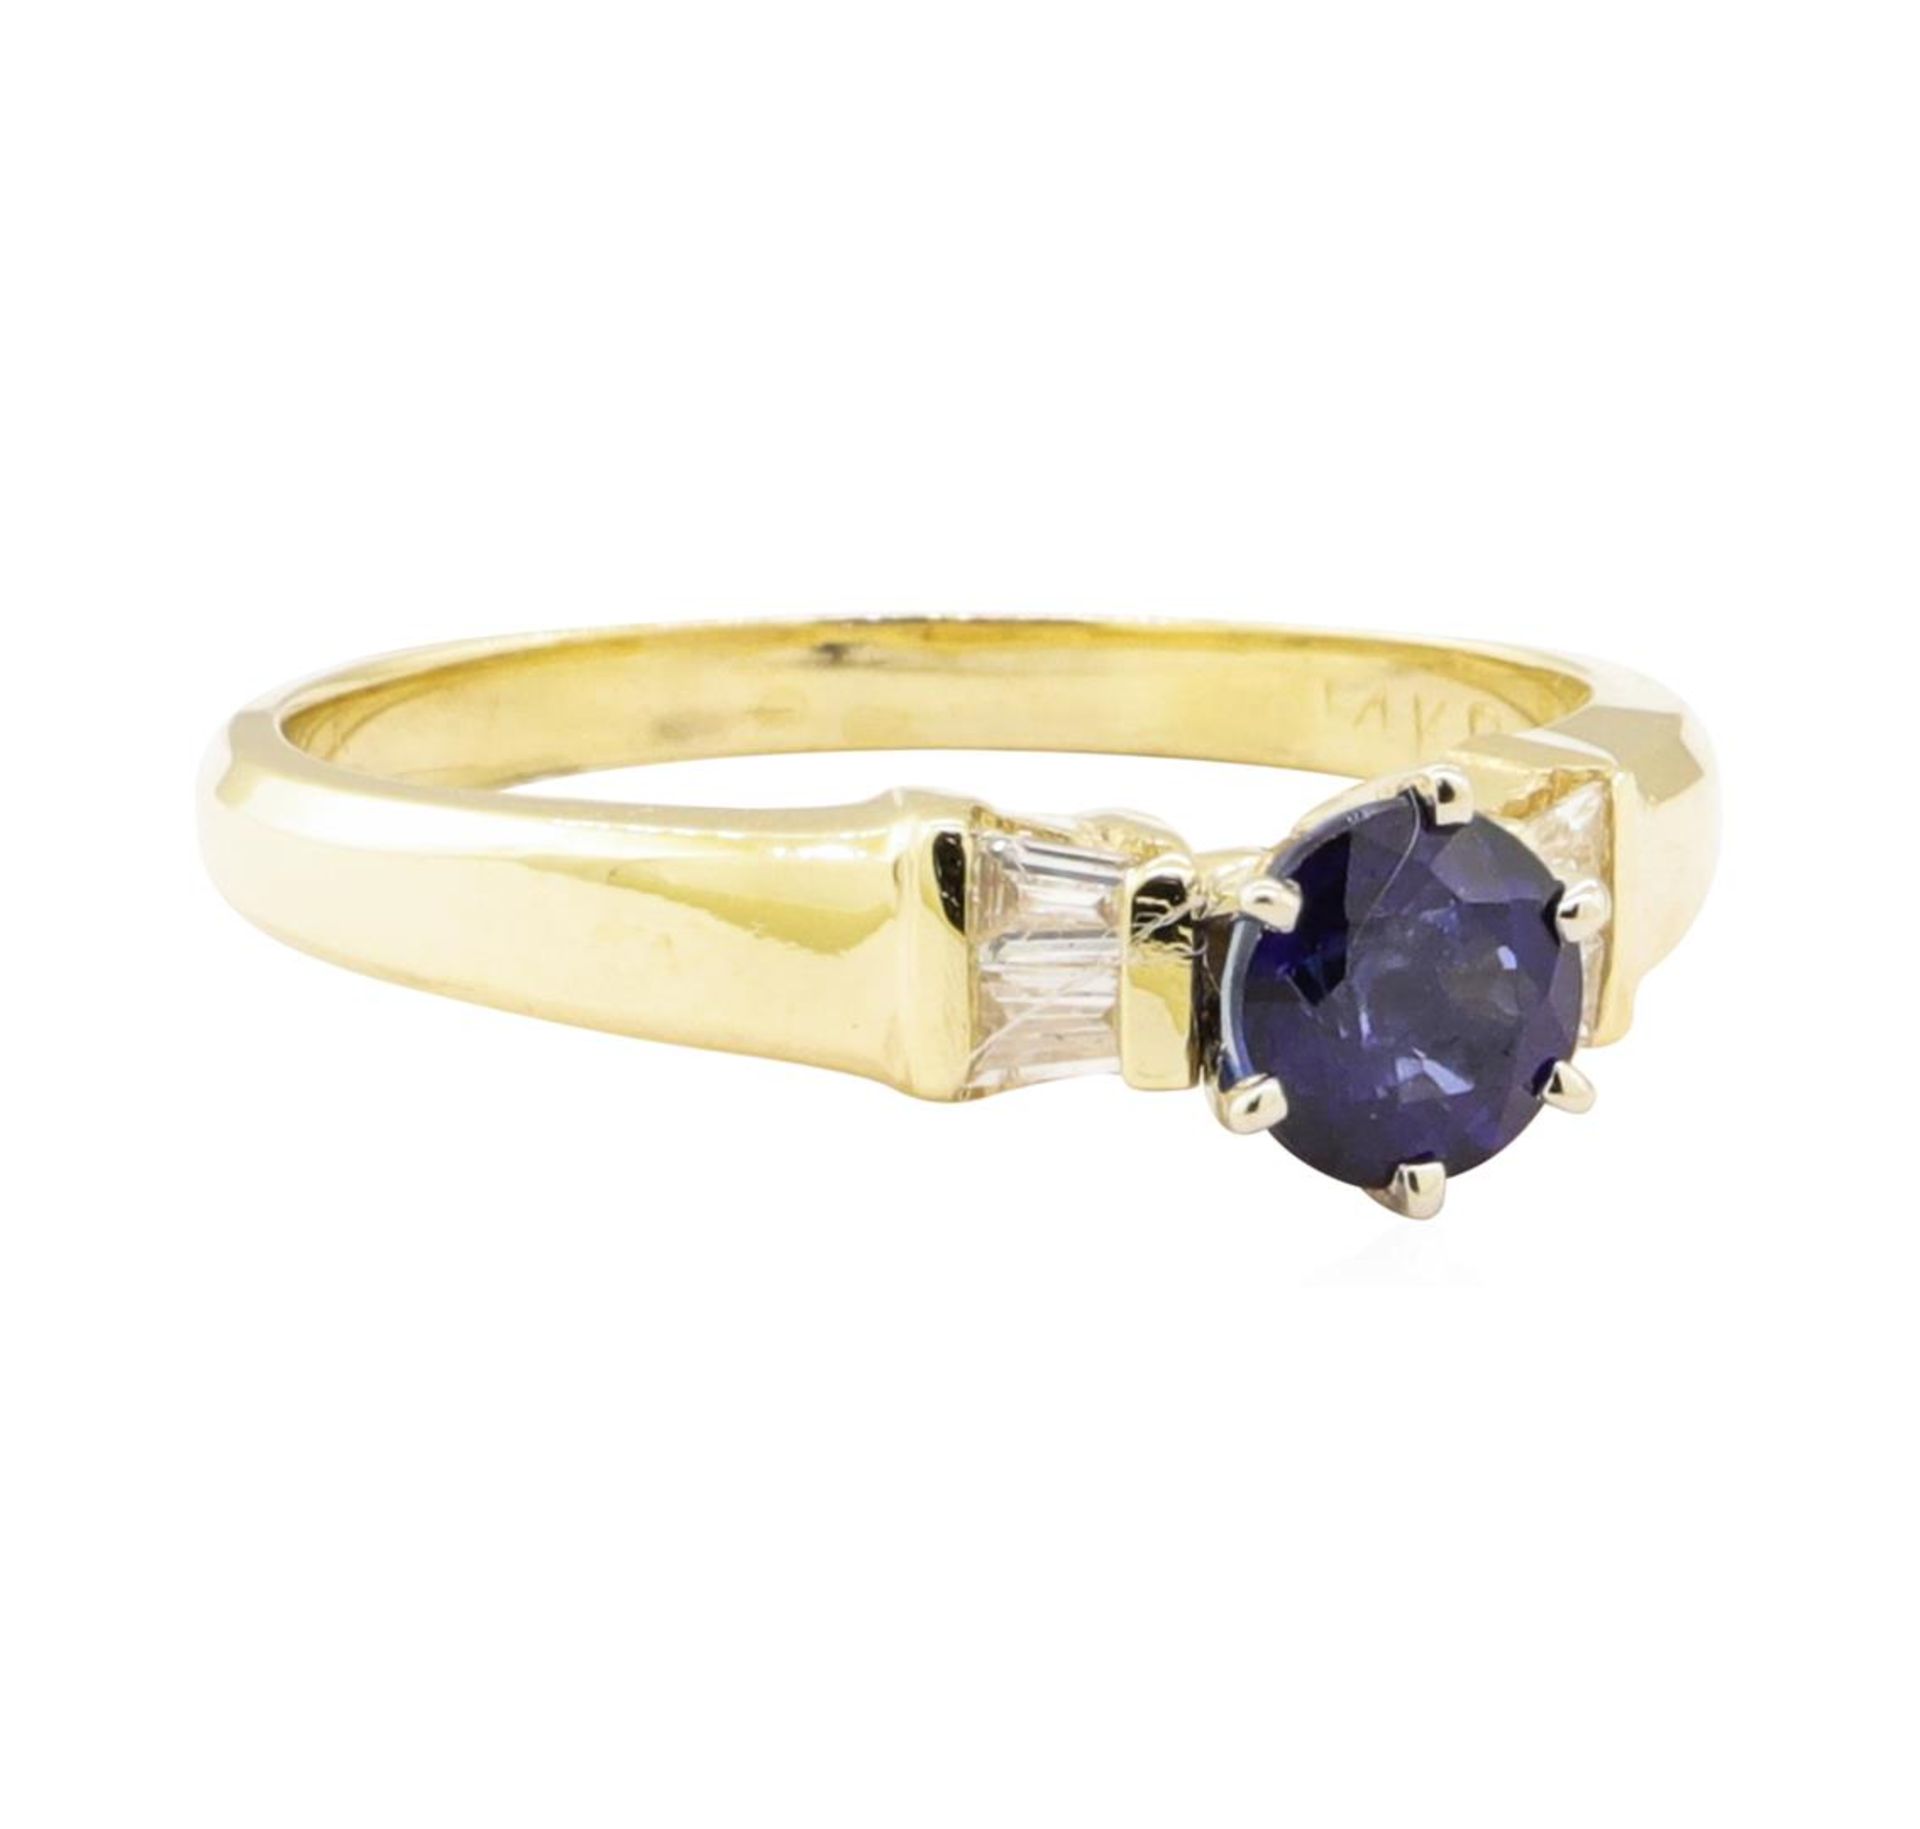 0.98ctw Blue Sapphire and Diamond Ring - 14KT Yellow Gold